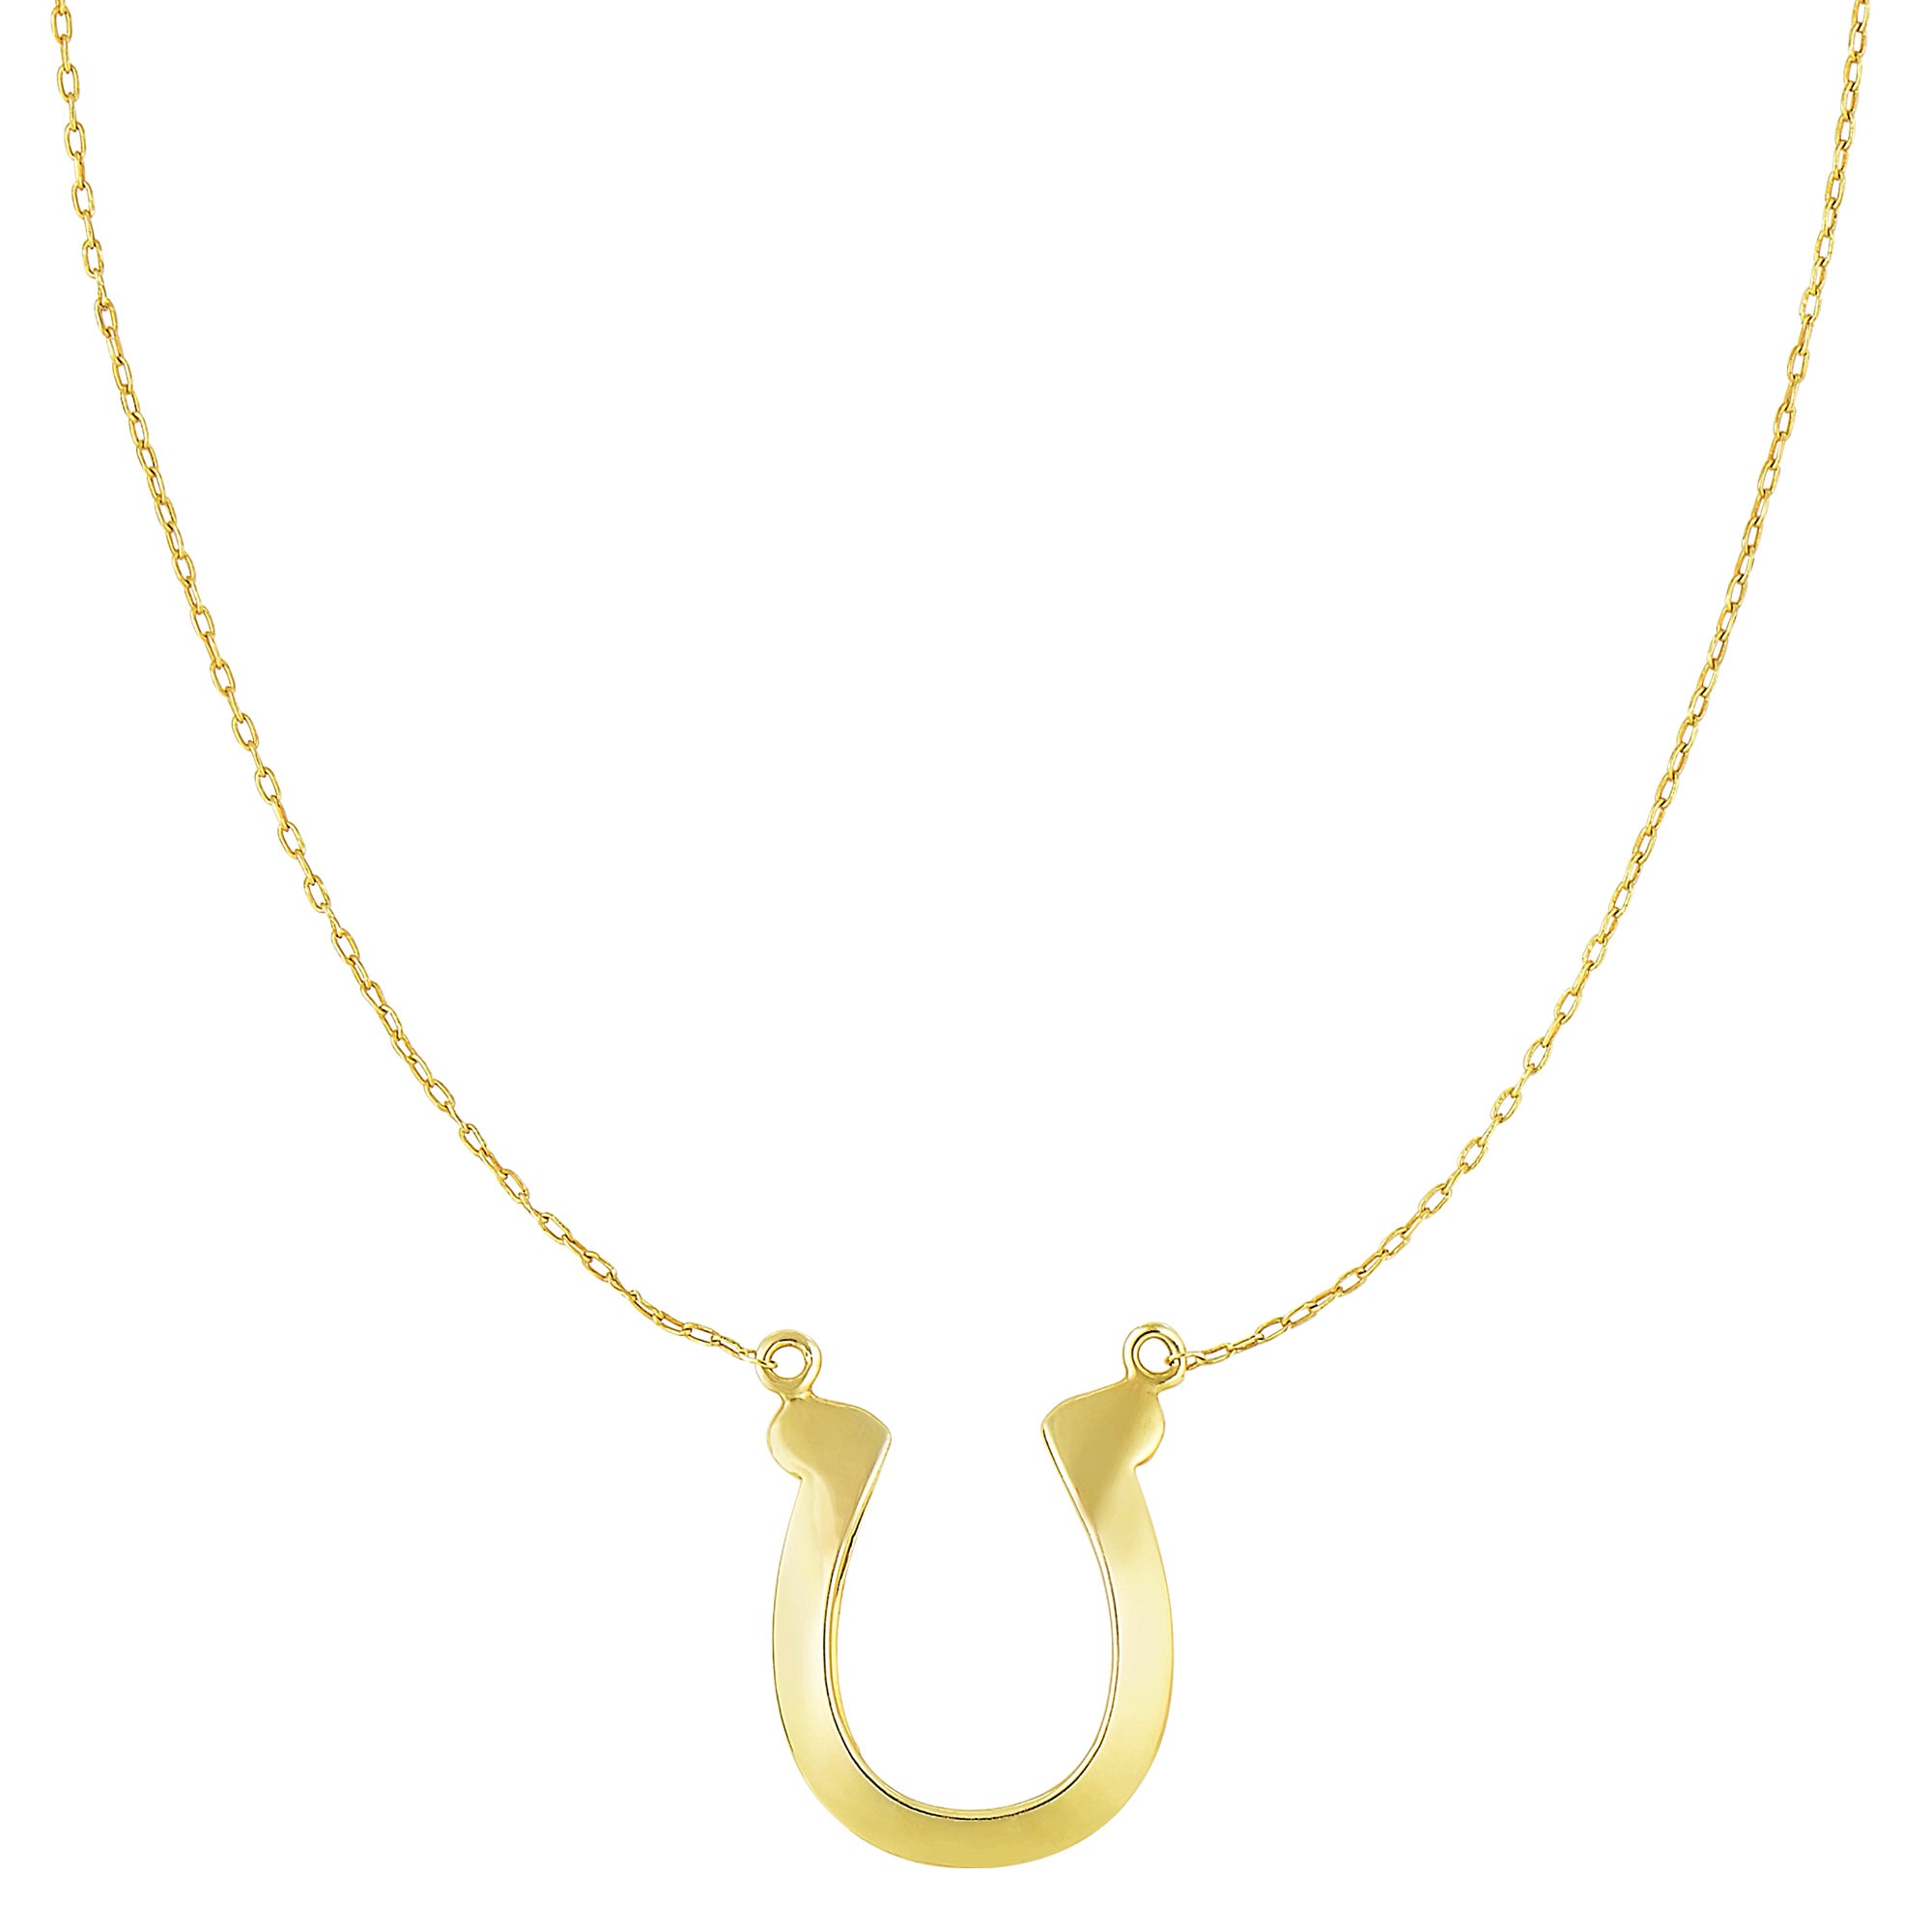 14k Yellow Gold Shiny Lucky Horse Shoe Pendant Necklace, 18" fine designer jewelry for men and women